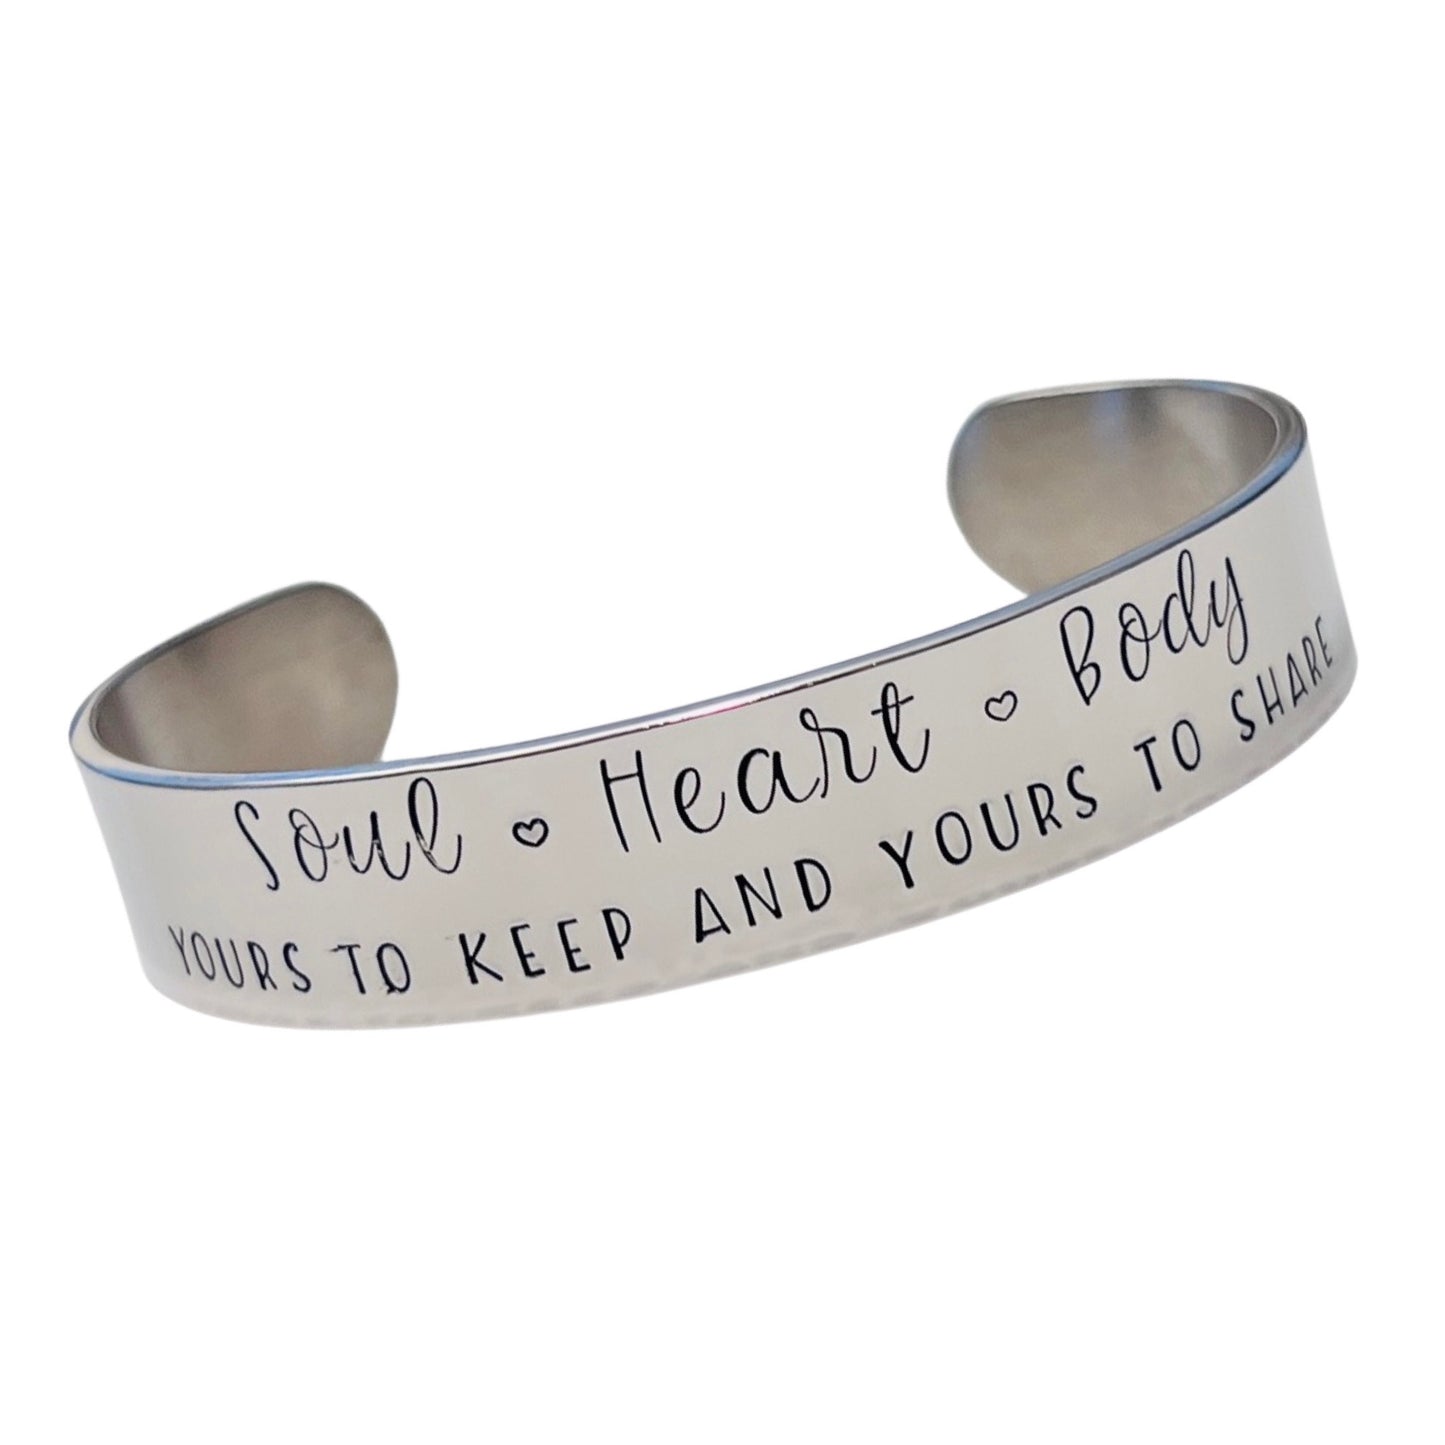 Soul, Heart, Body - Yours to keep and yours to share | Kennedy Ryan | Cuff Bracelet